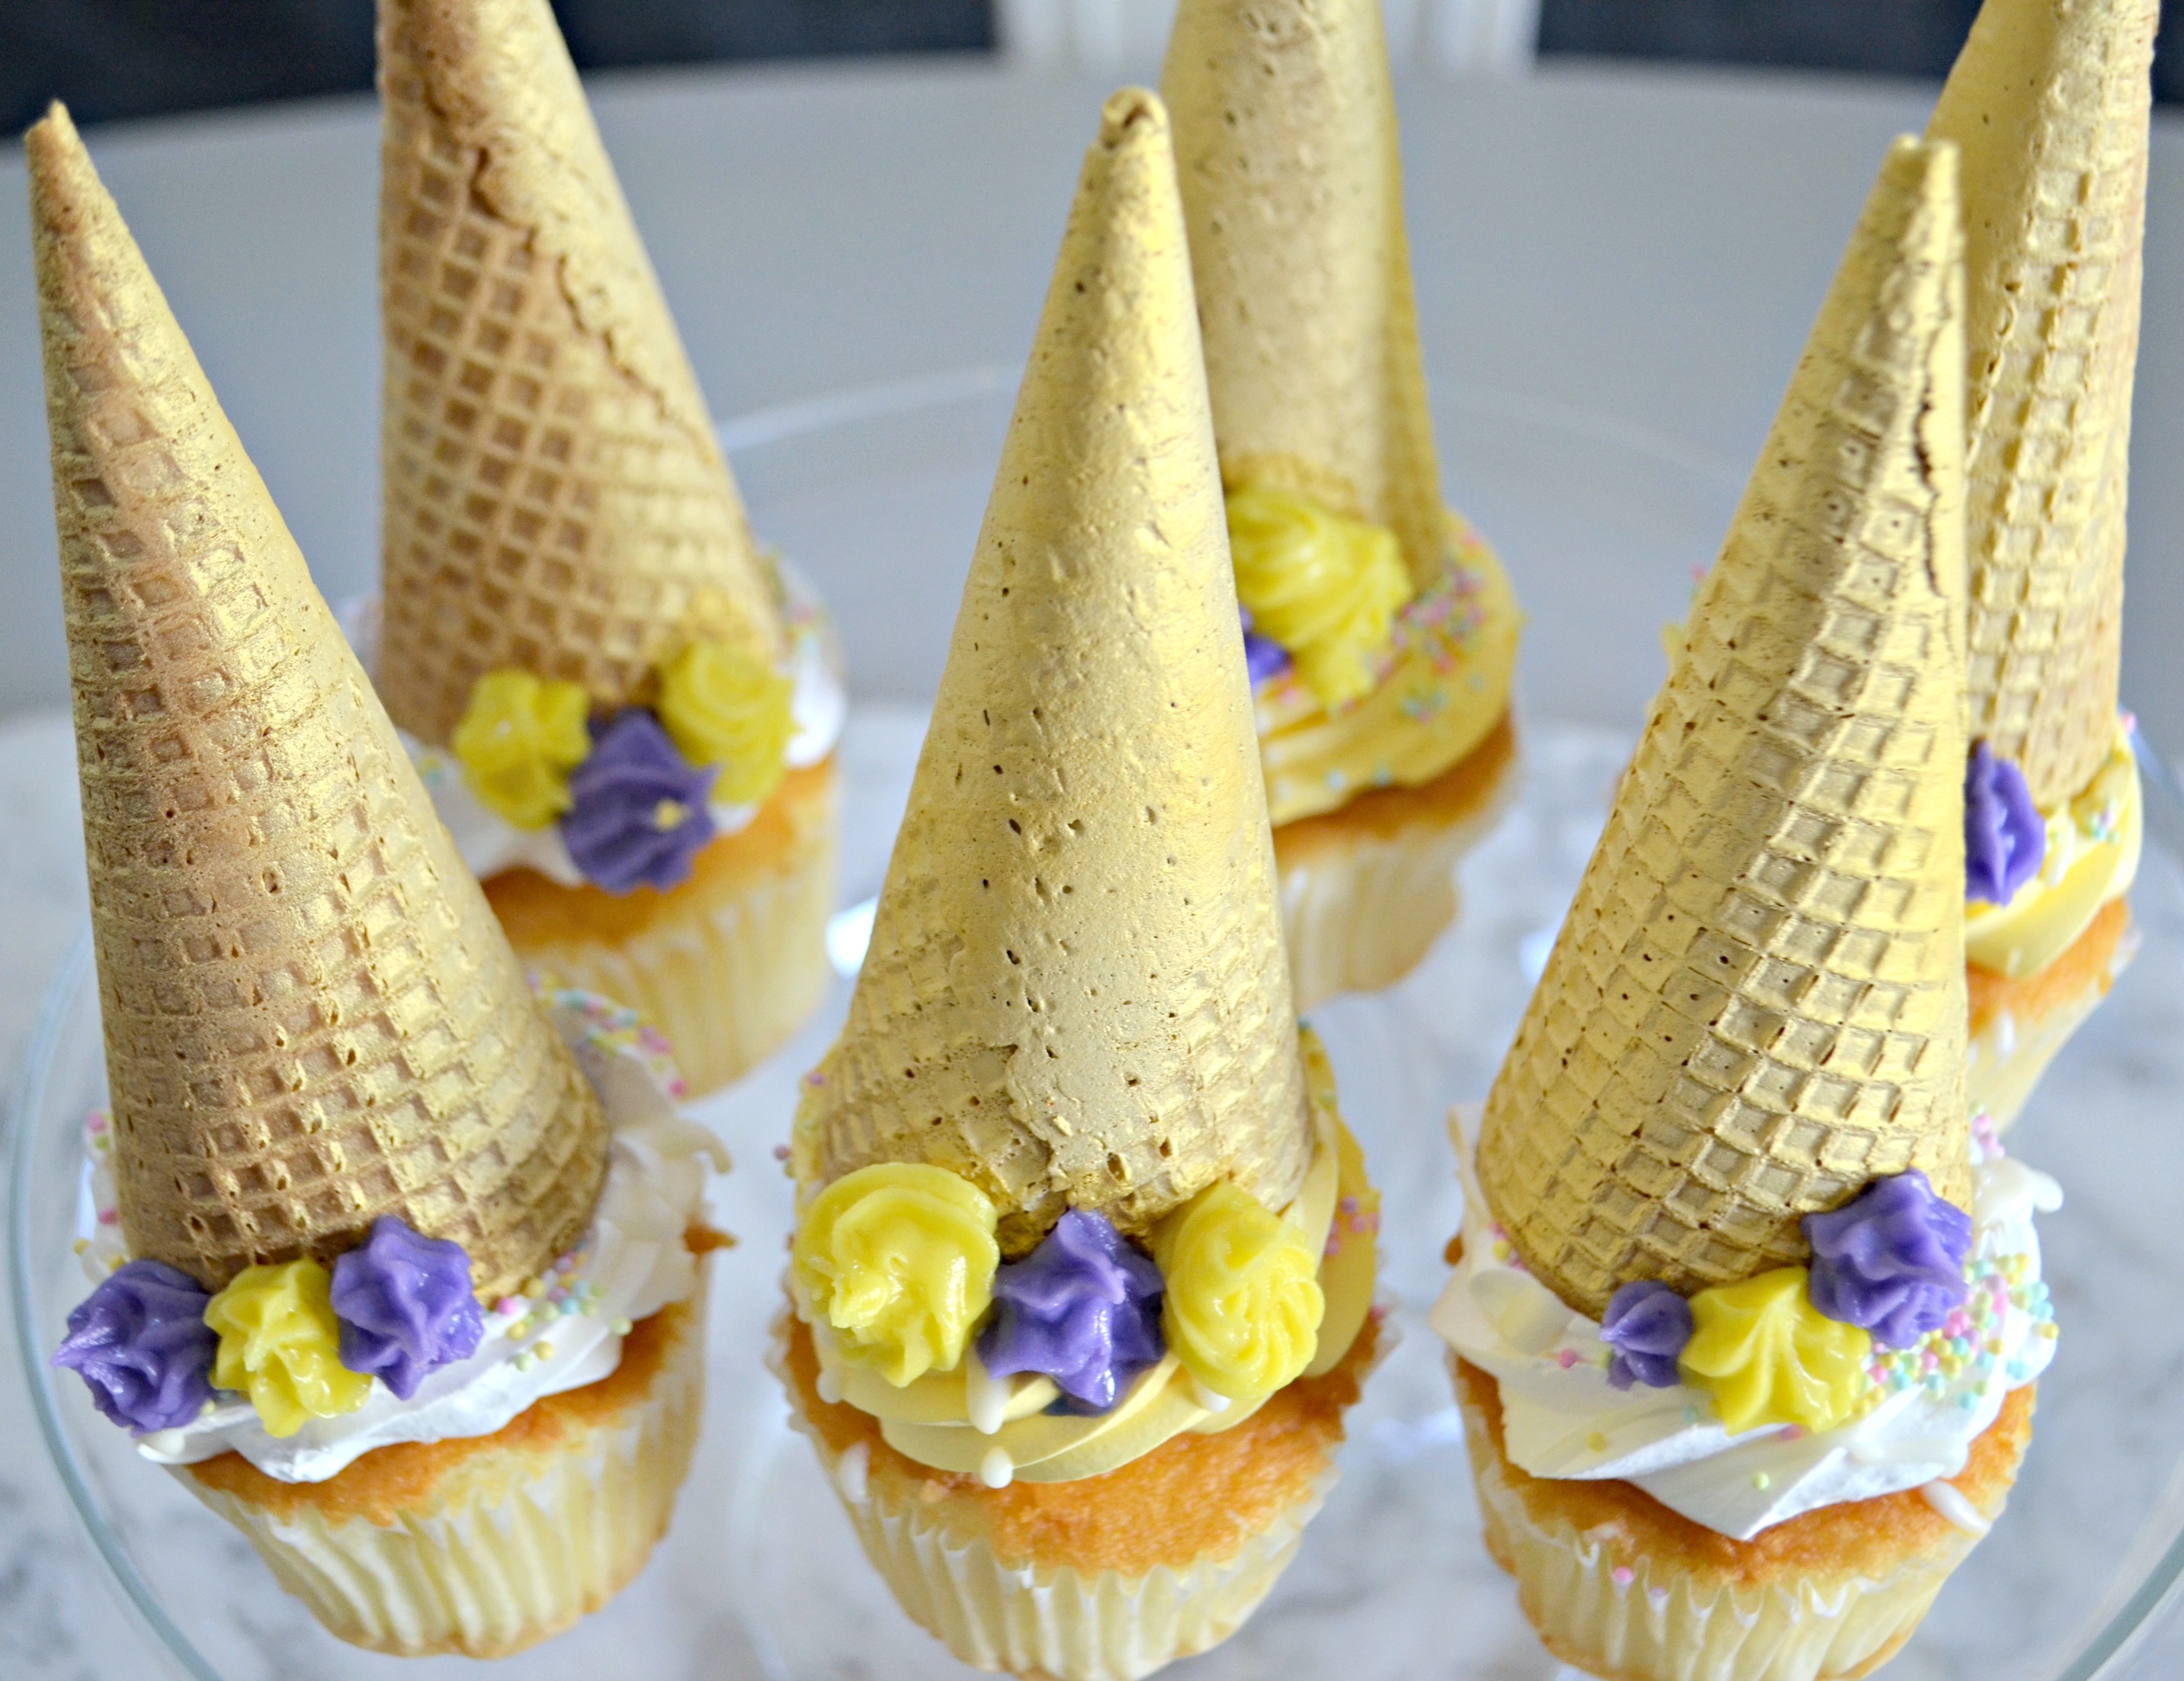 ice cream cones on cupcakes with flower frosting